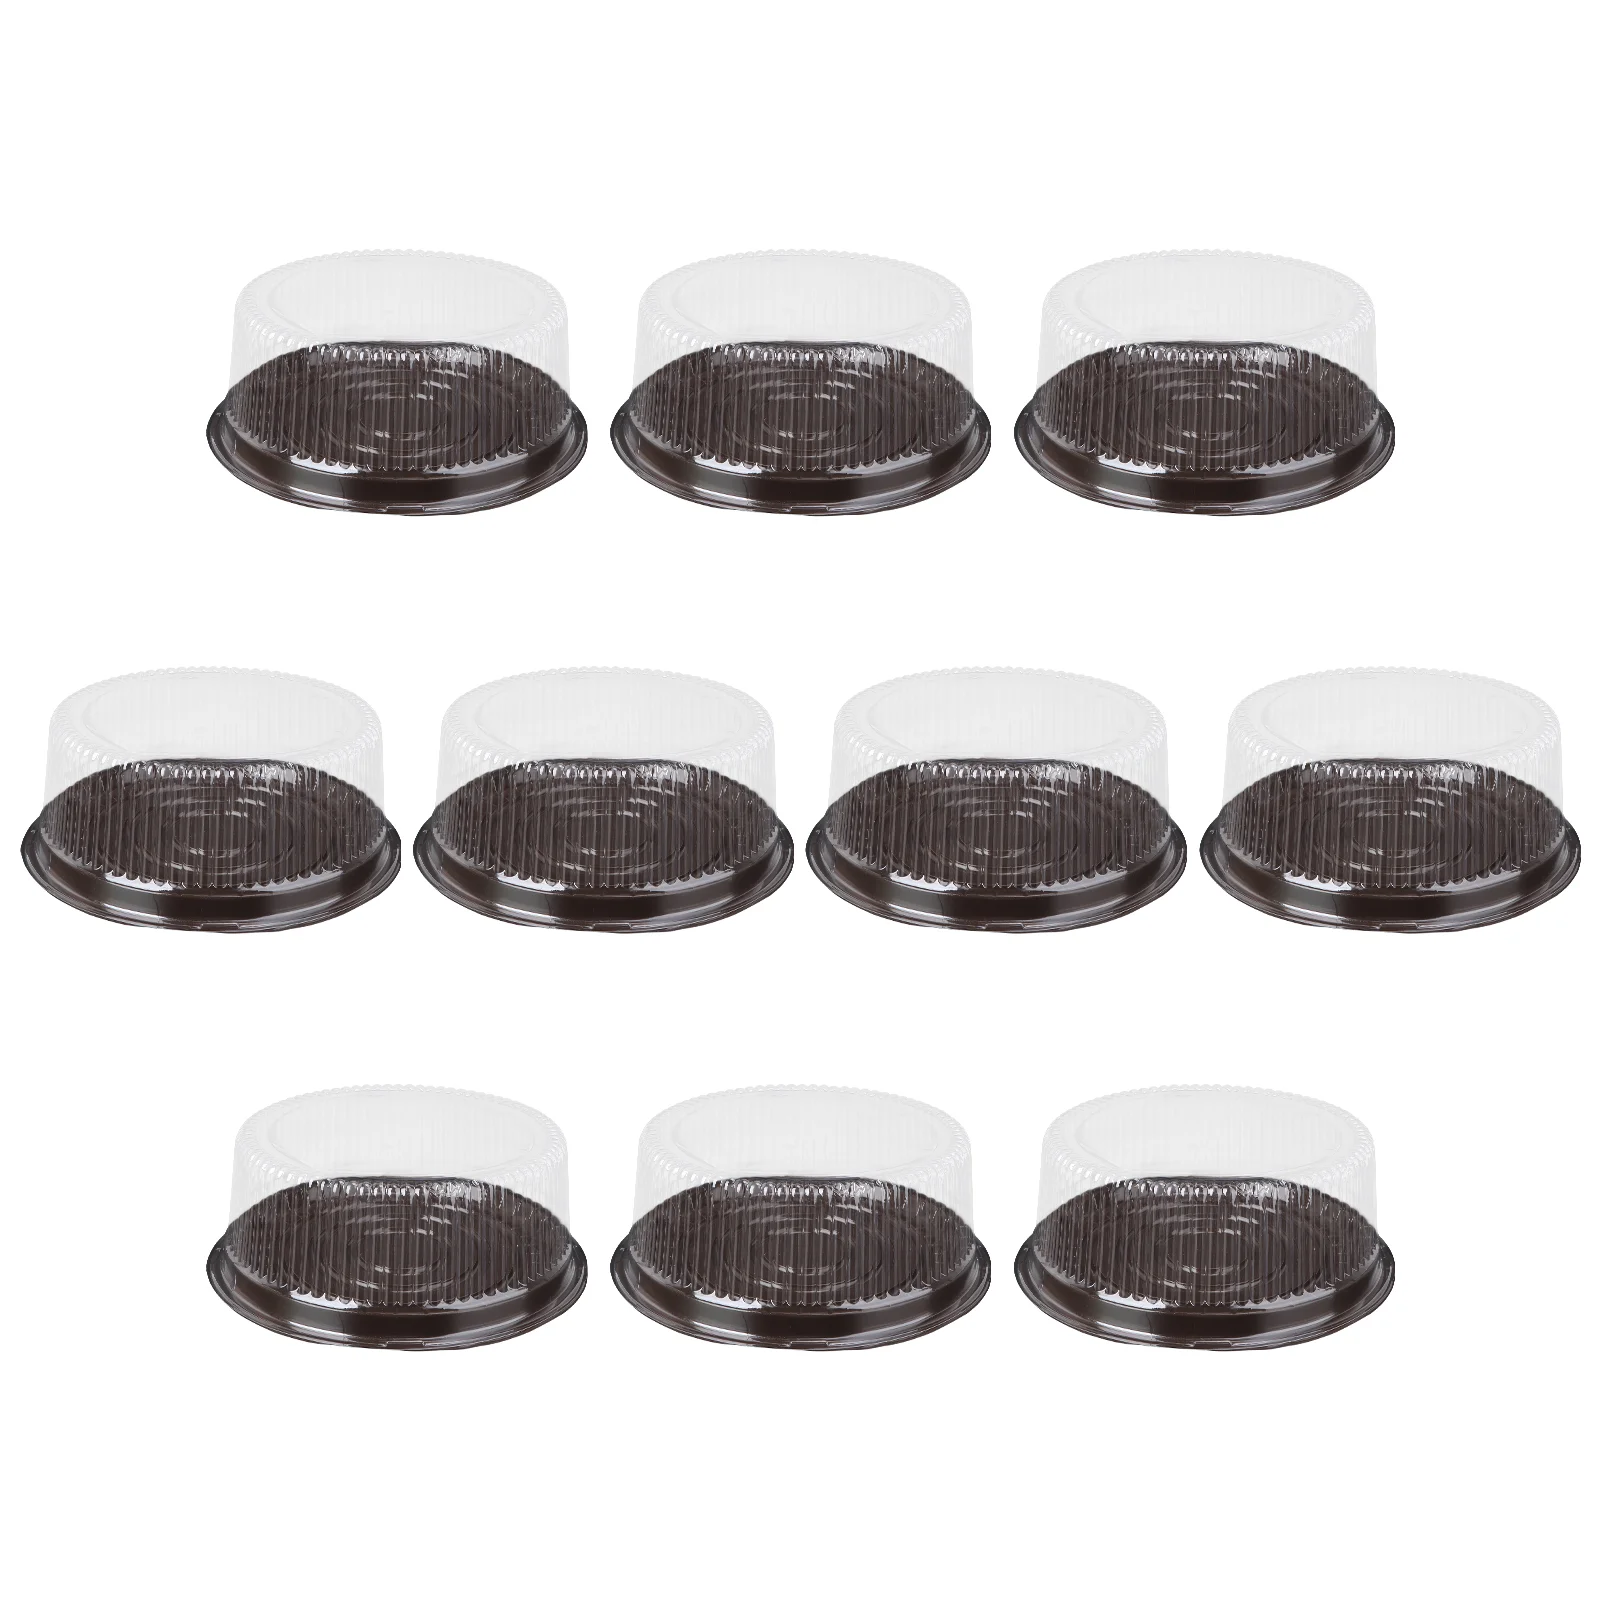 

10Pcs Cake Containers with Dome Lids Cake Boards Round Cake Carriers Transport Boxes Cake Holder Display Case for Birthday